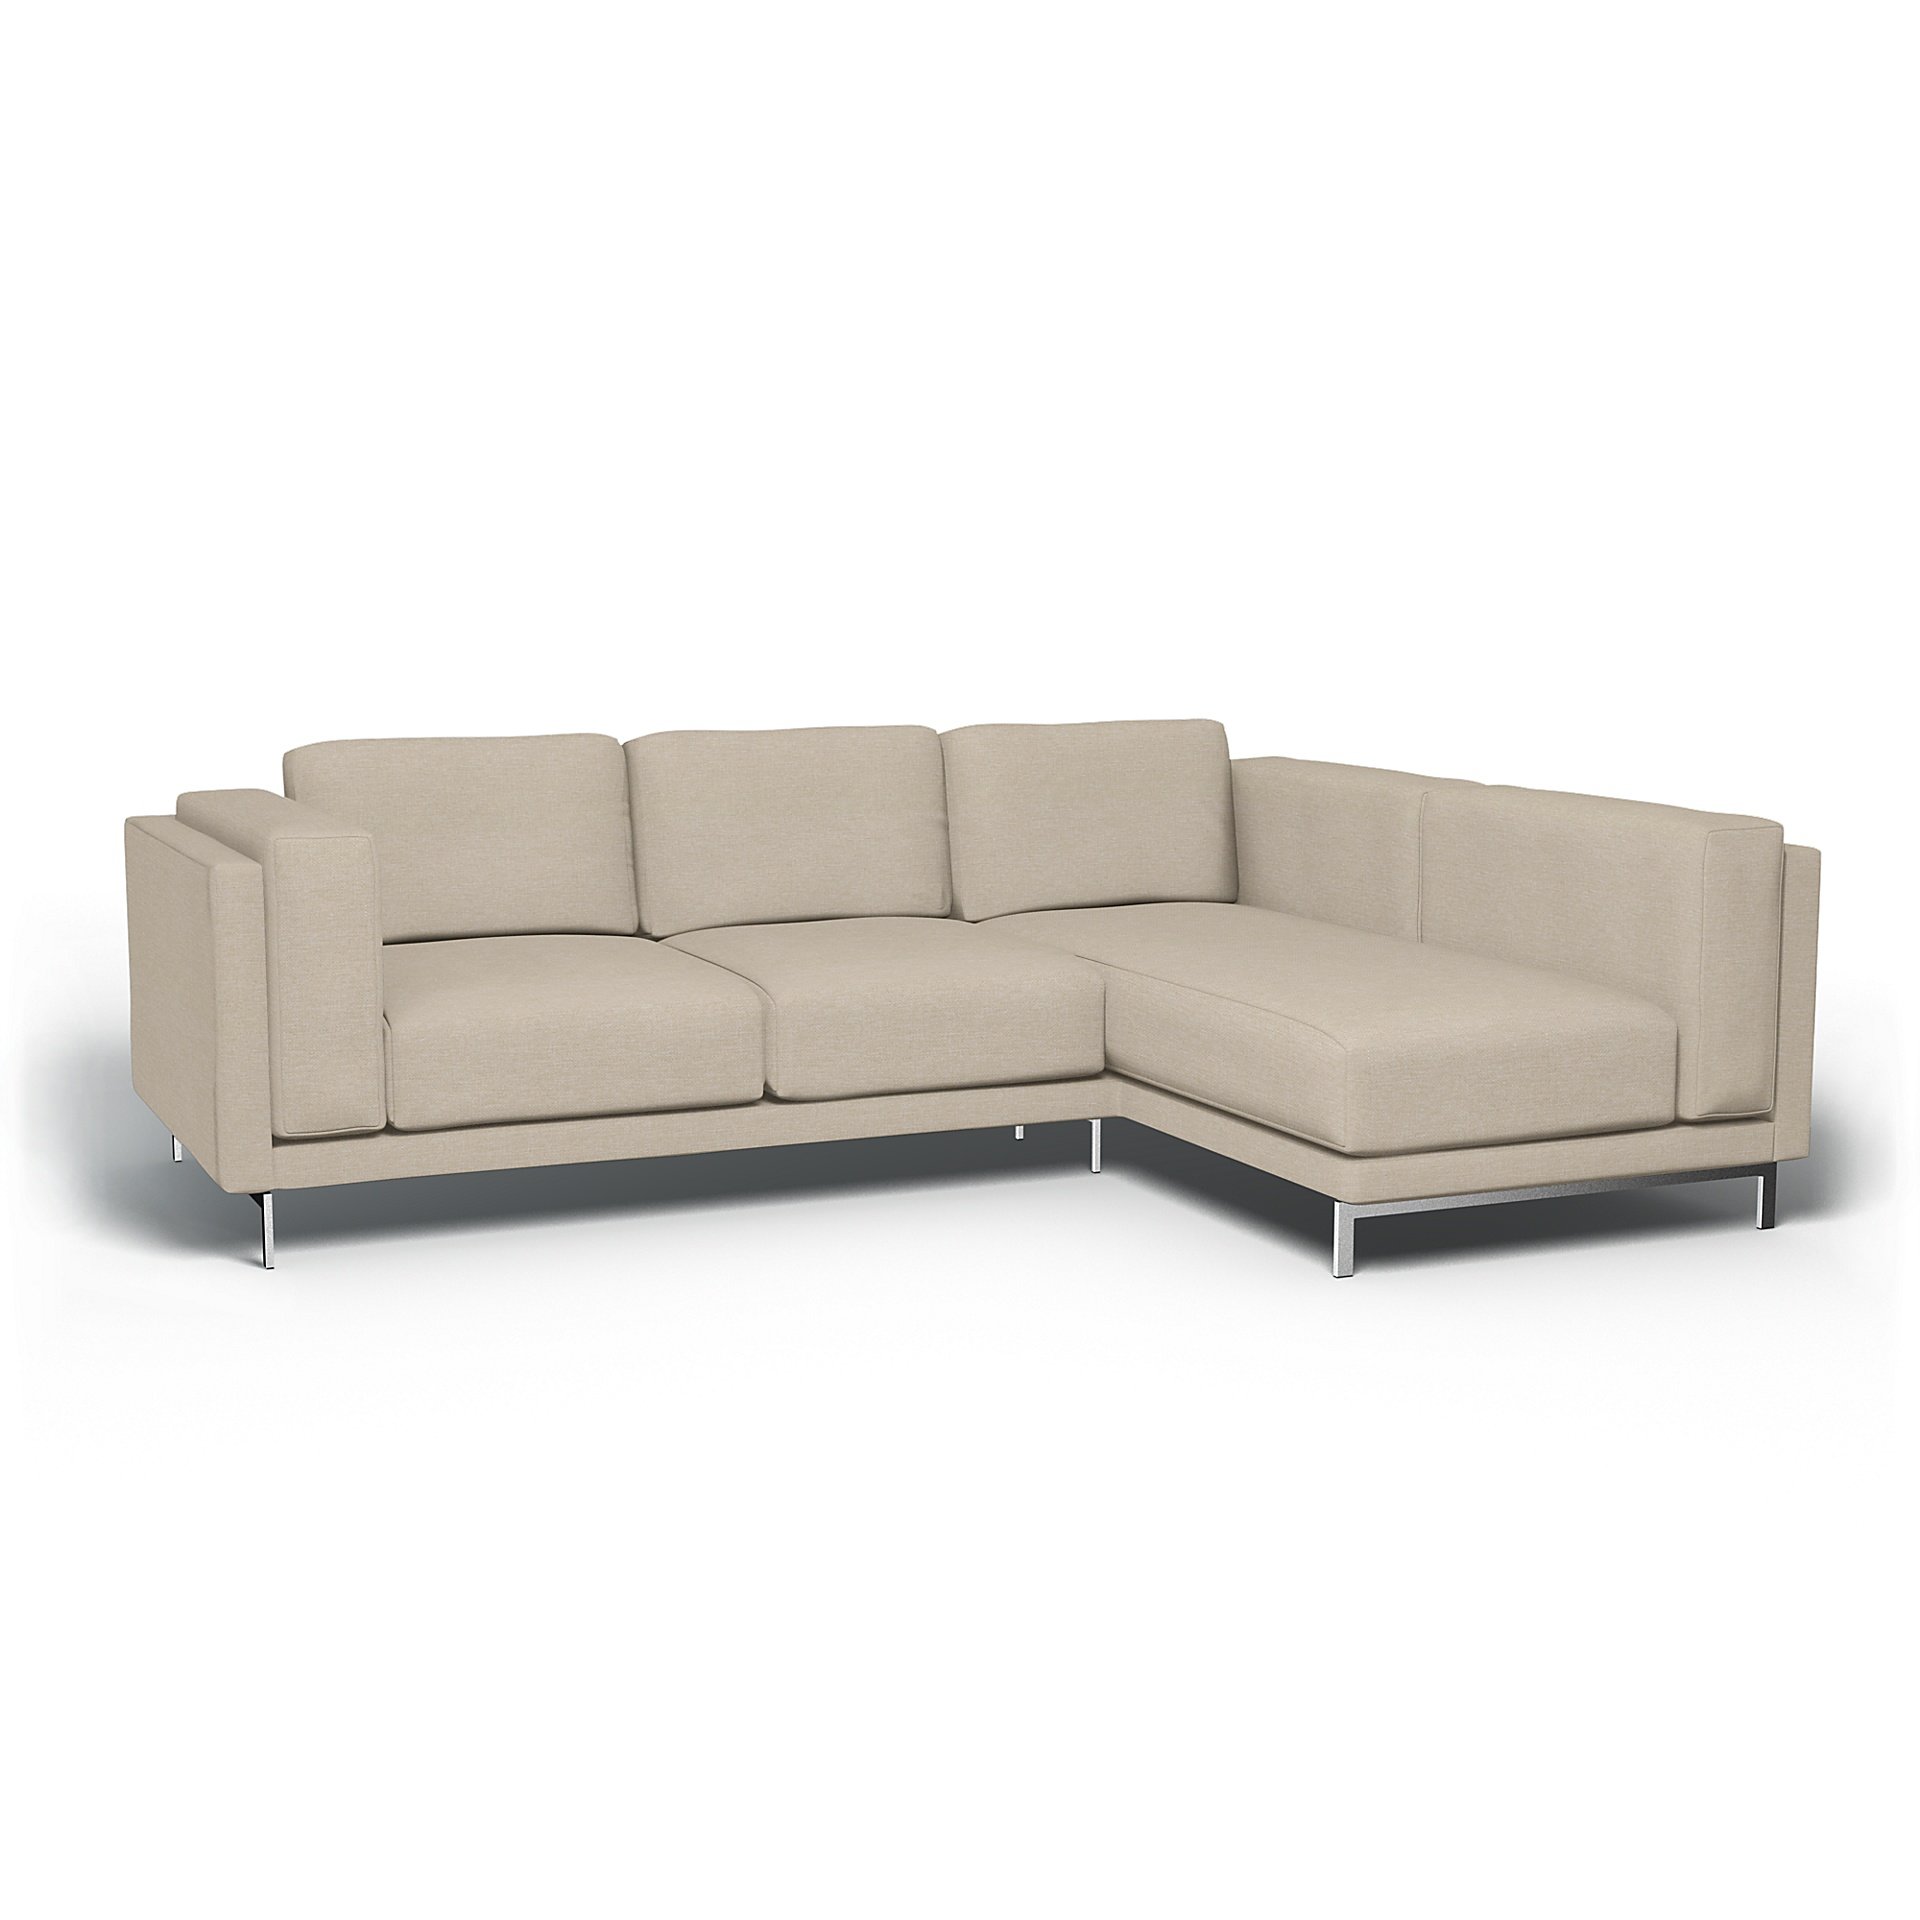 IKEA - Nockeby 3 Seat Sofa with Right Chaise Cover, Natural, Boucle & Texture - Bemz